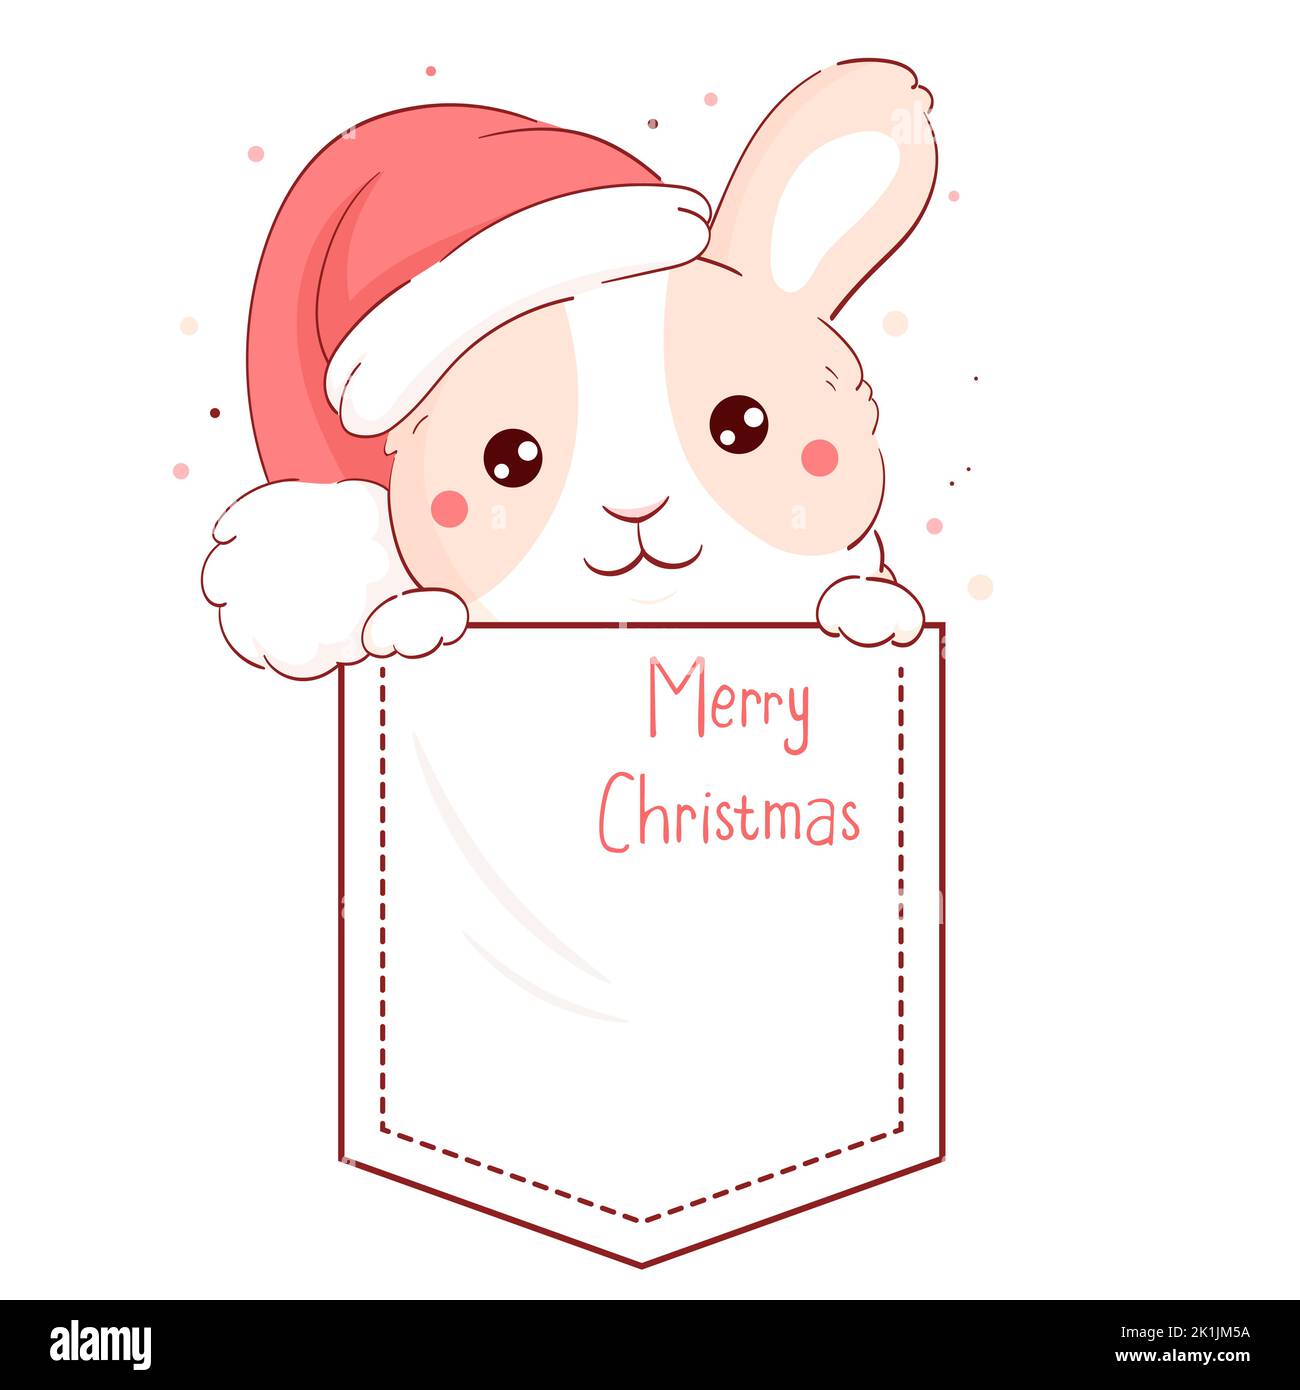 Lovely bunny in pocket. Inscription Merry Christmas. Baby print with rabbit in pocket. Childish print with funny pet for t-shirt. Cute xmas card with Stock Vector